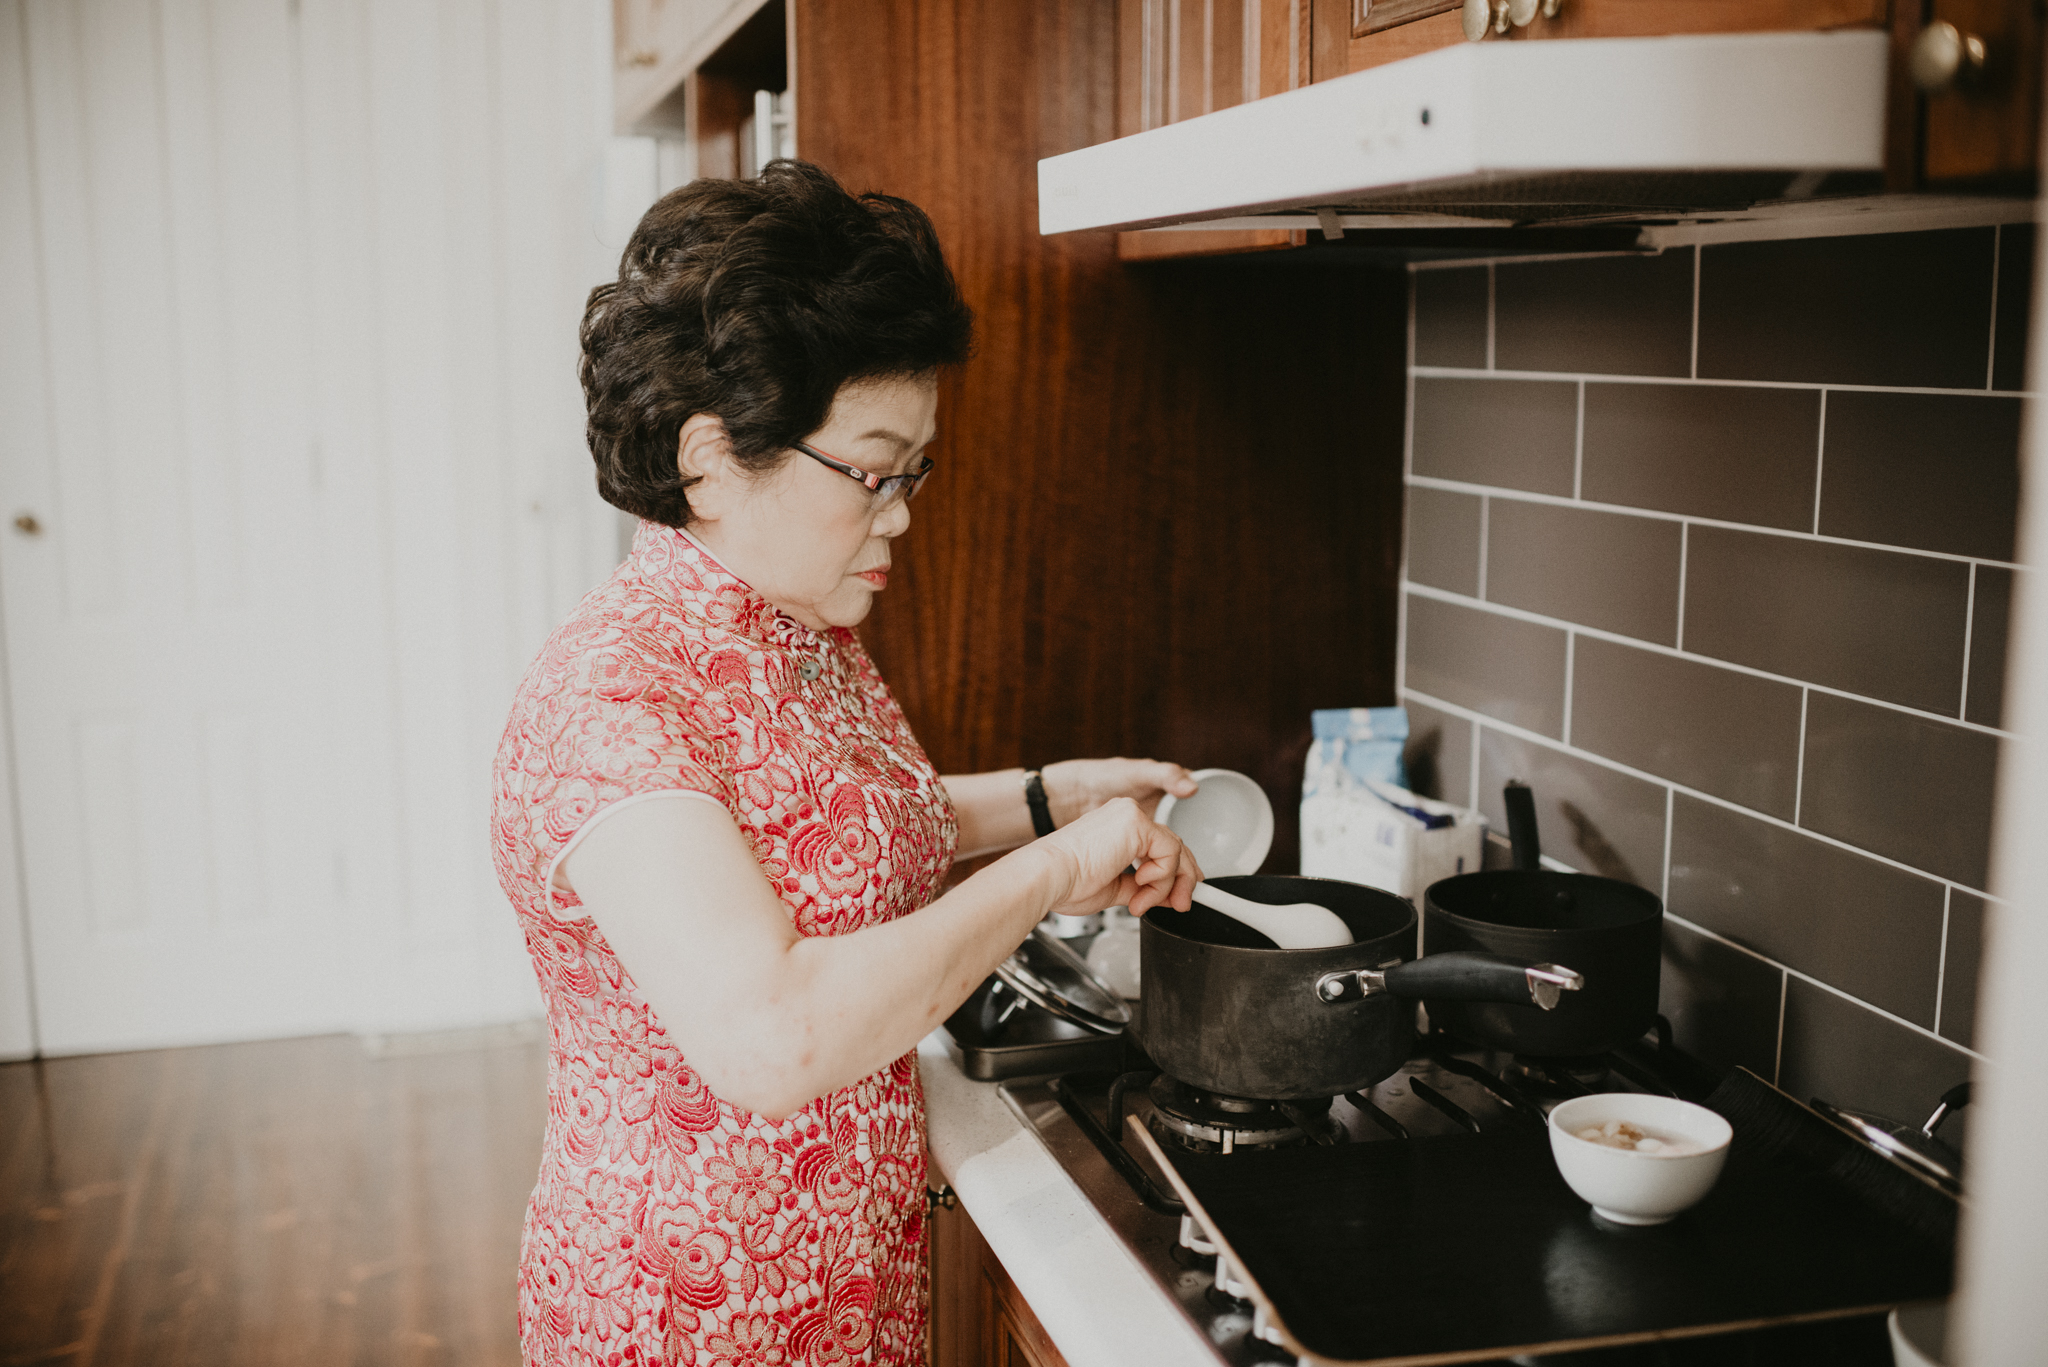 agnes-duy-15th-december-2018-chinese-vietnamese-wedding-tea-ceremony-yarraville-home-house-documentary-candid-photographer-sarah-matler-photography-39